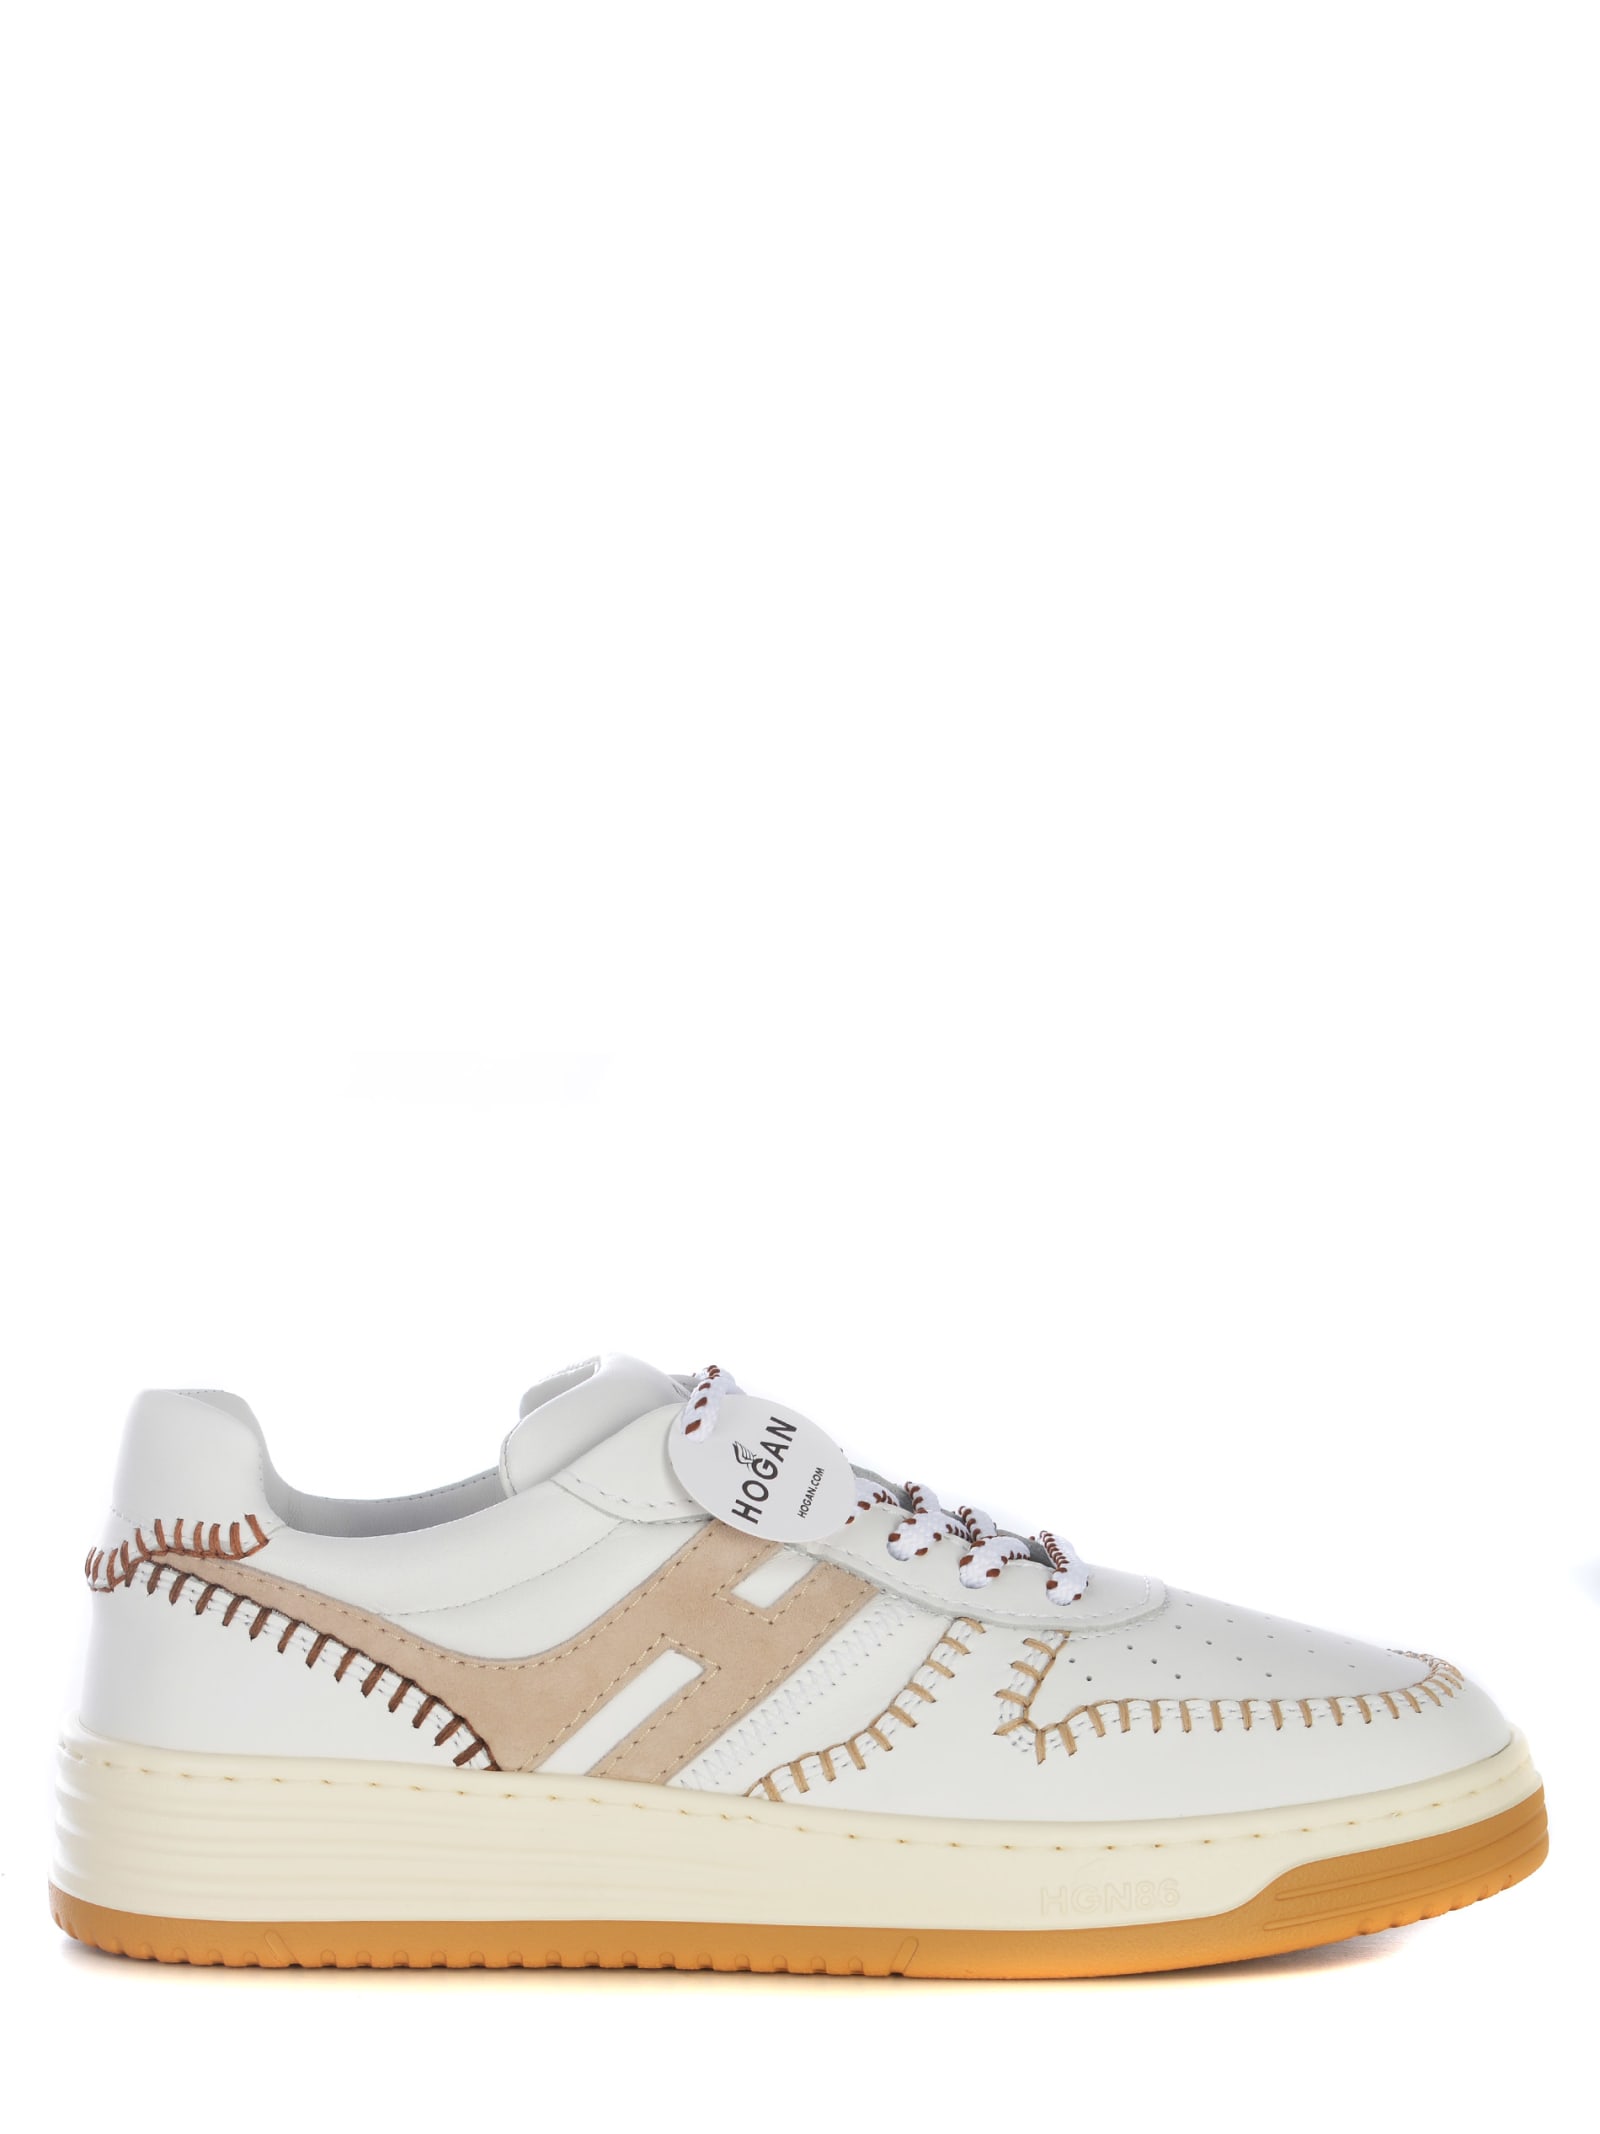 Hogan Sneakers  H630 Made Of Leather In White